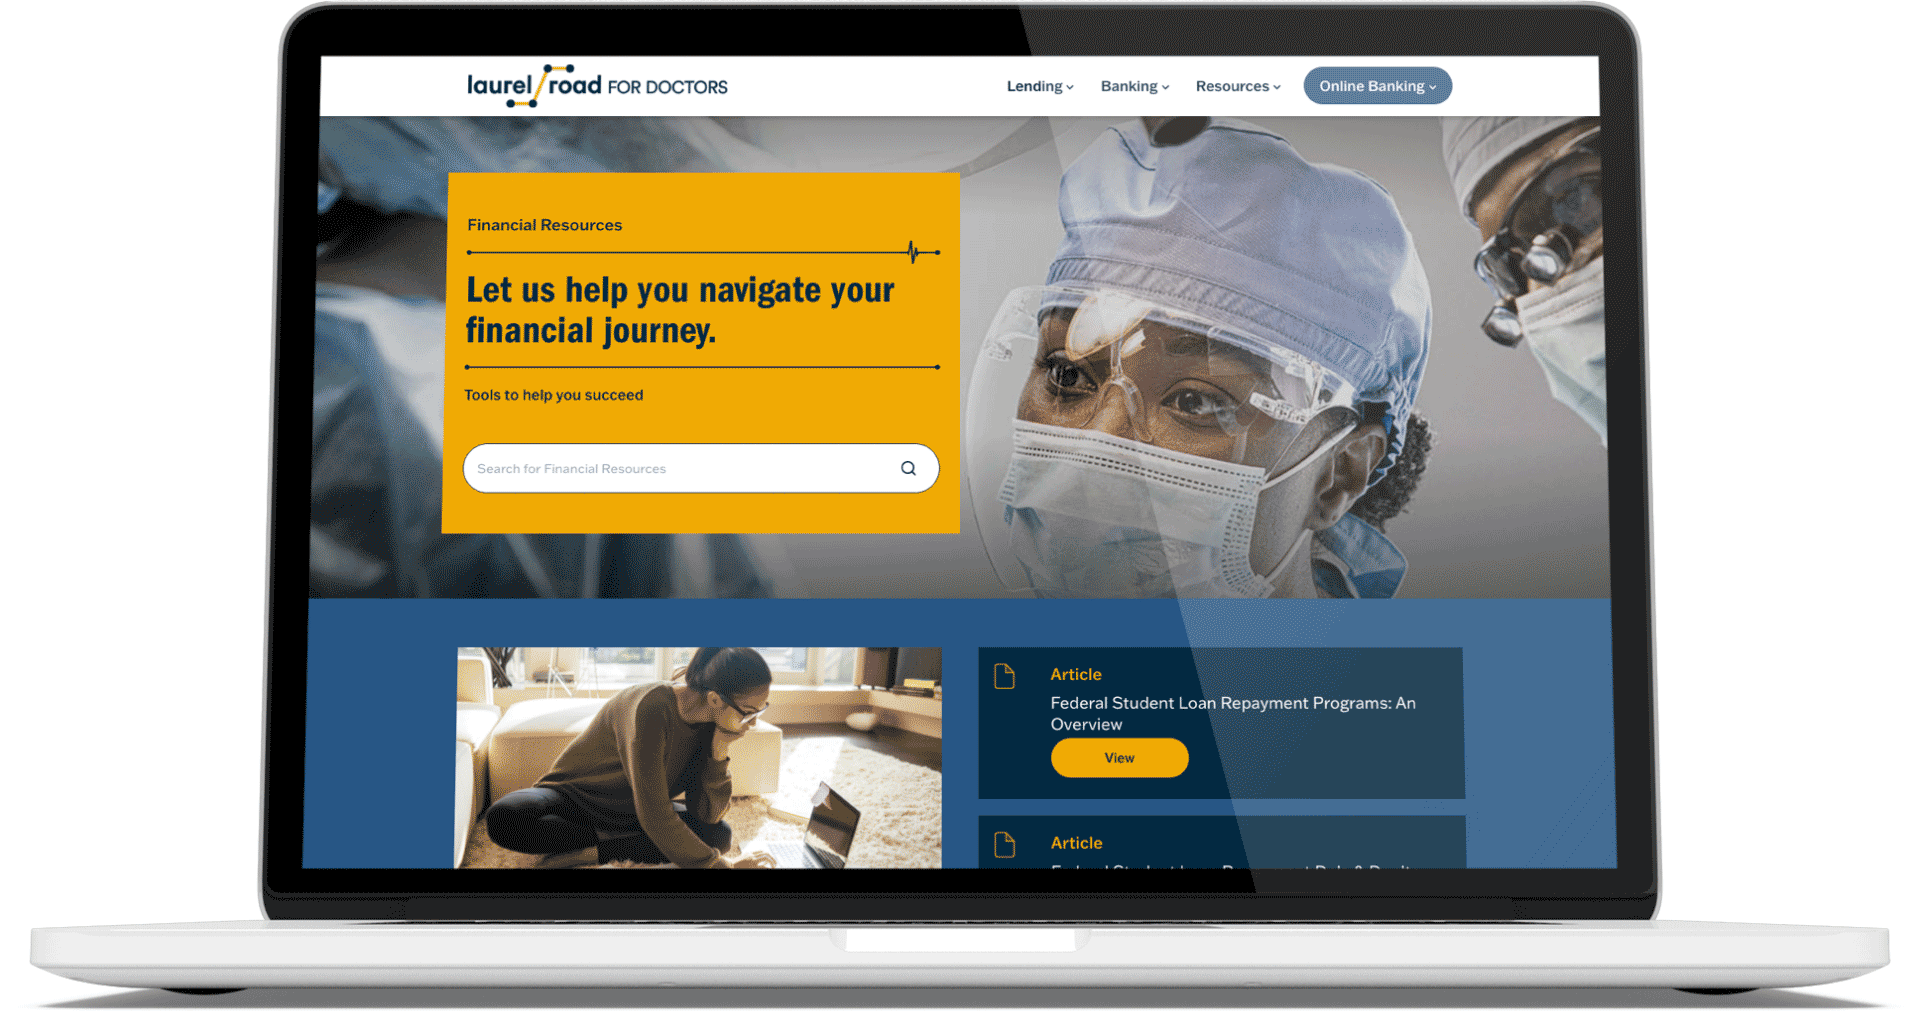 Image of resource hub - financial resources available to healthcare providers